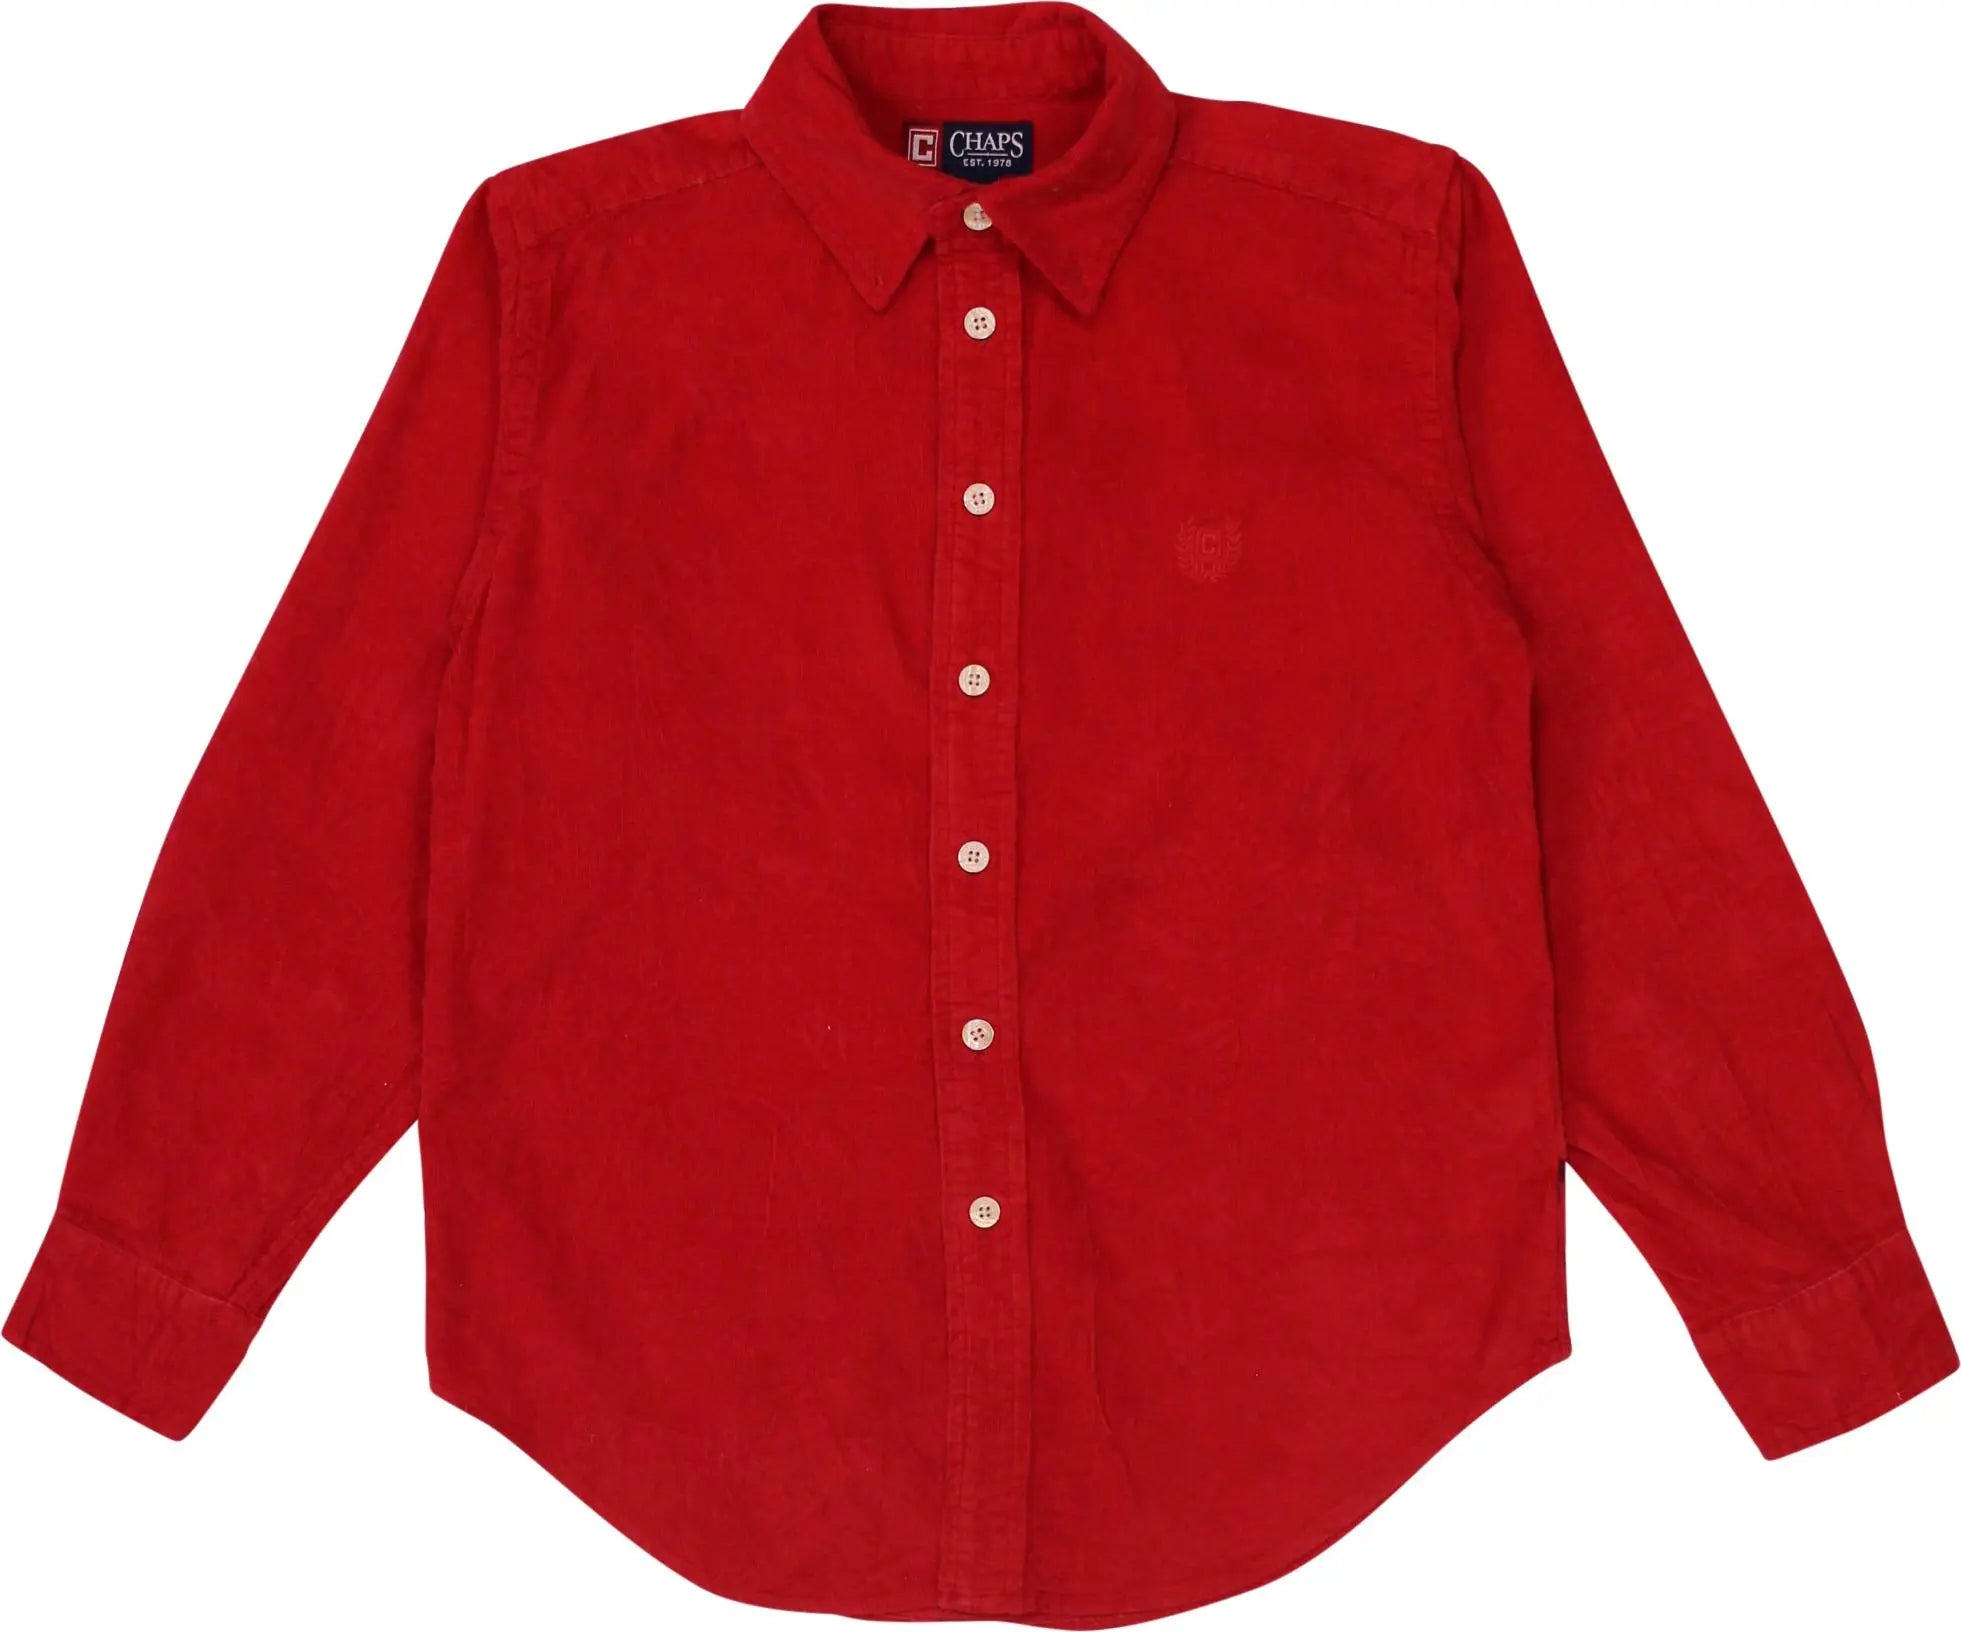 Chaps - Red Corduroy Shirt by Chaps- ThriftTale.com - Vintage and second handclothing